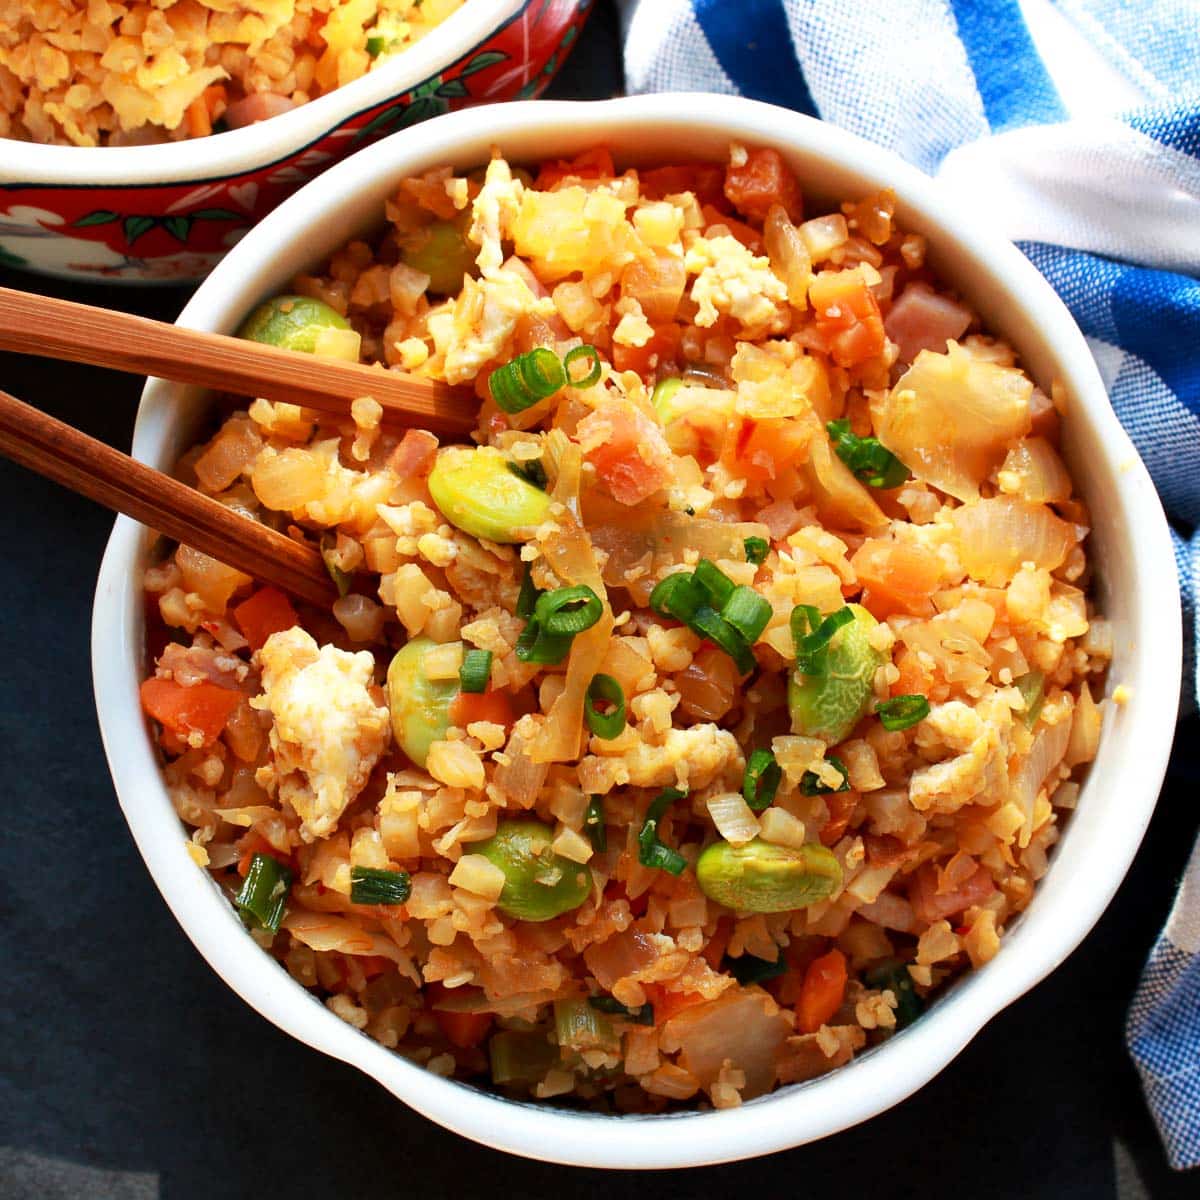 Cauliflower Kimchi Fried Rice in a white bowl with wooden chopsticks and a blue and white napkin on the side.